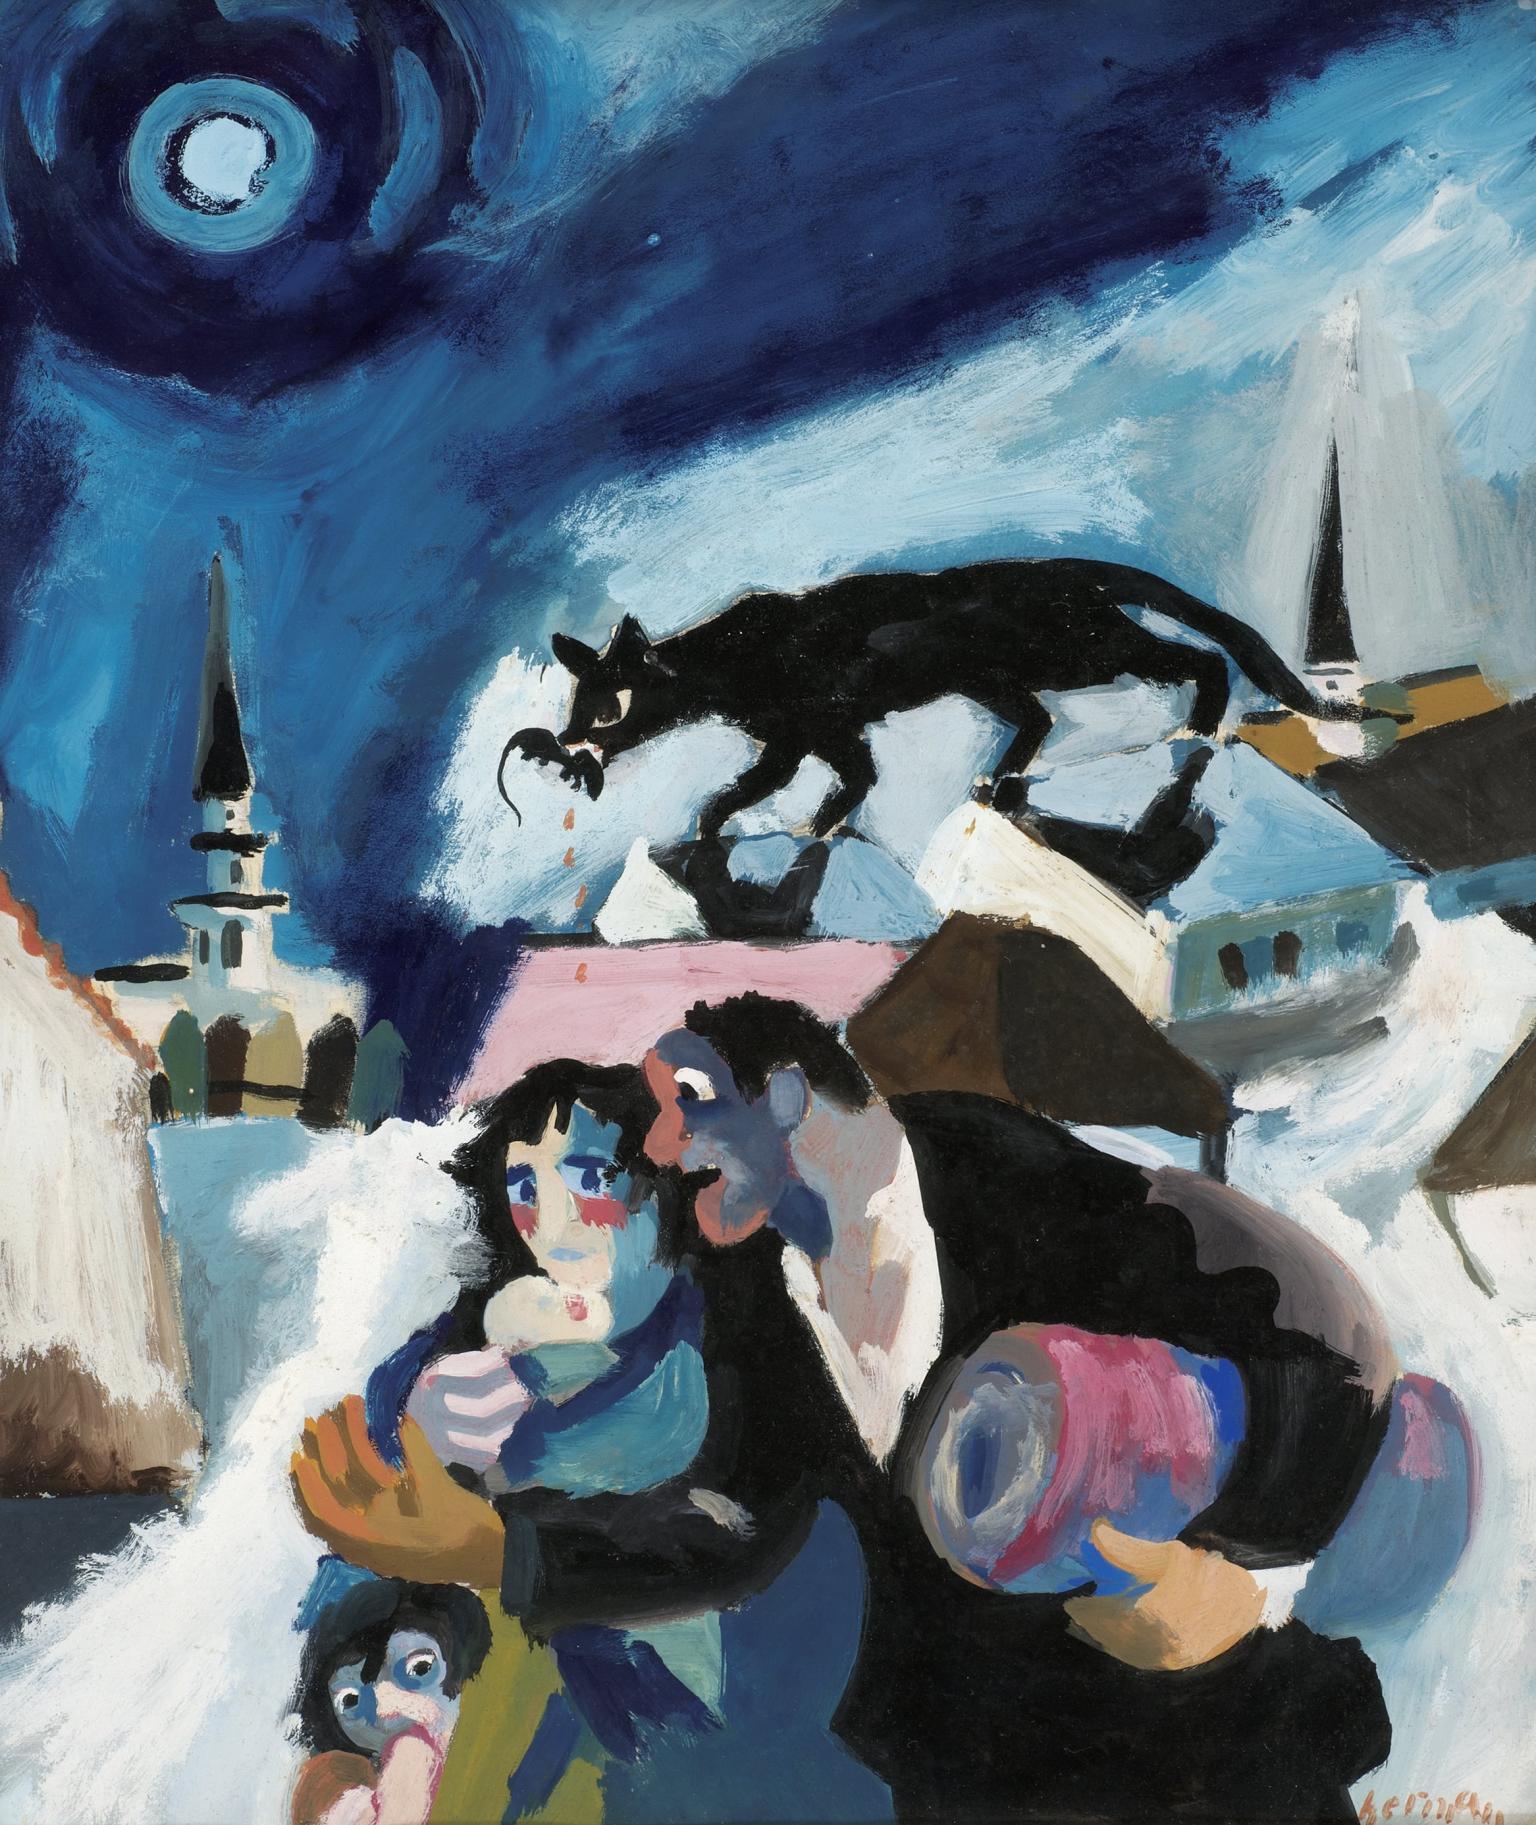 Painting of fearful father, mother, and two children in the foreground outside of city buildings, and large cat with a rat in its mouth on top of the buildings in the background.